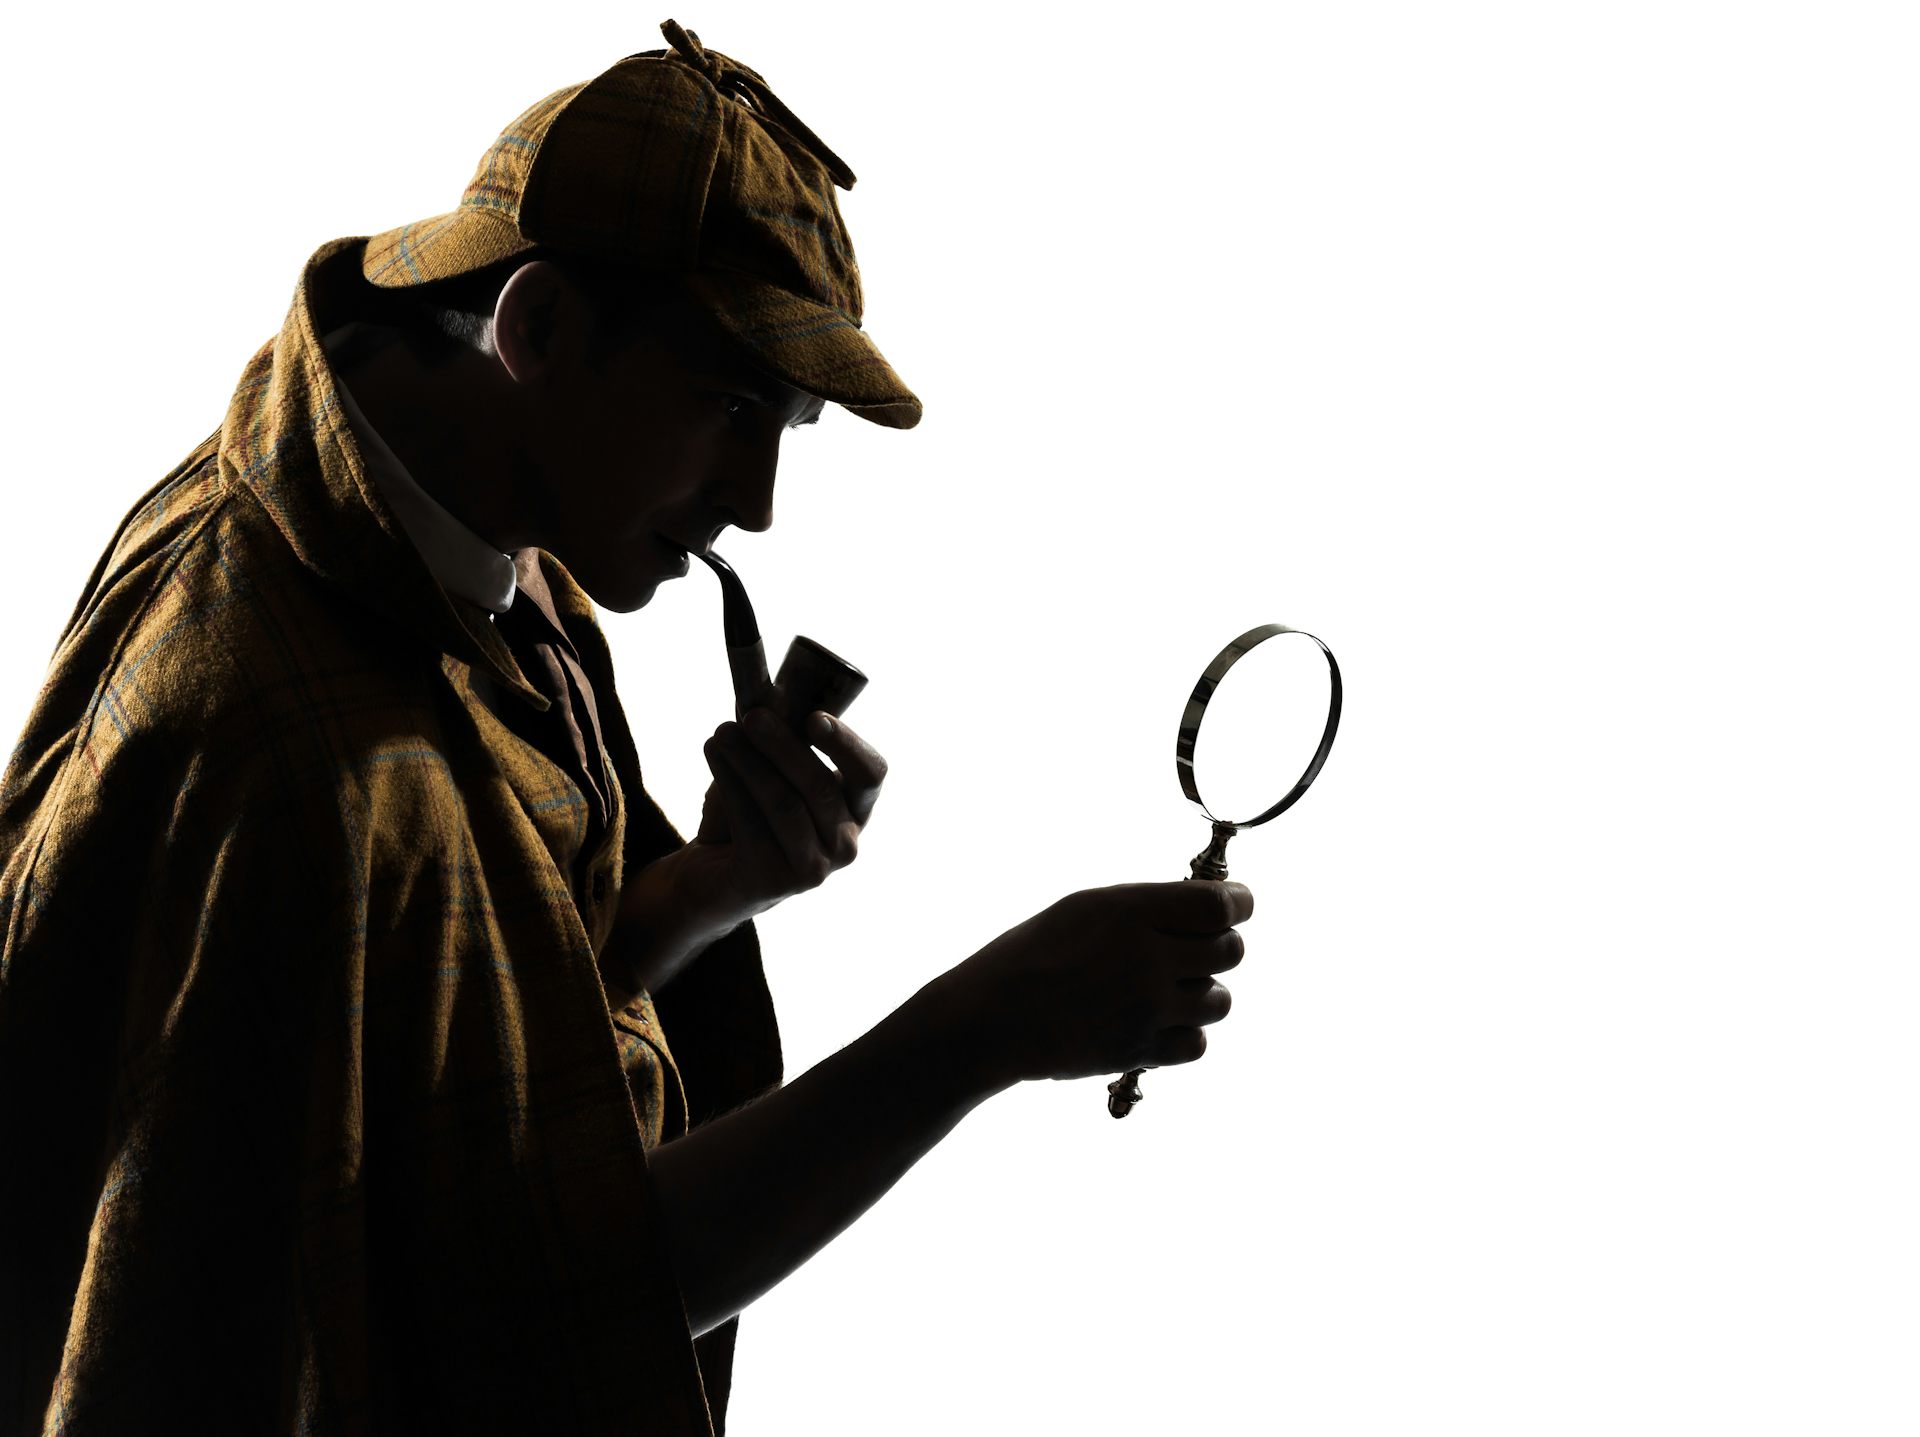 Sherlock Holmes and the case of toxic masculinity: what is behind the  detective's appeal?